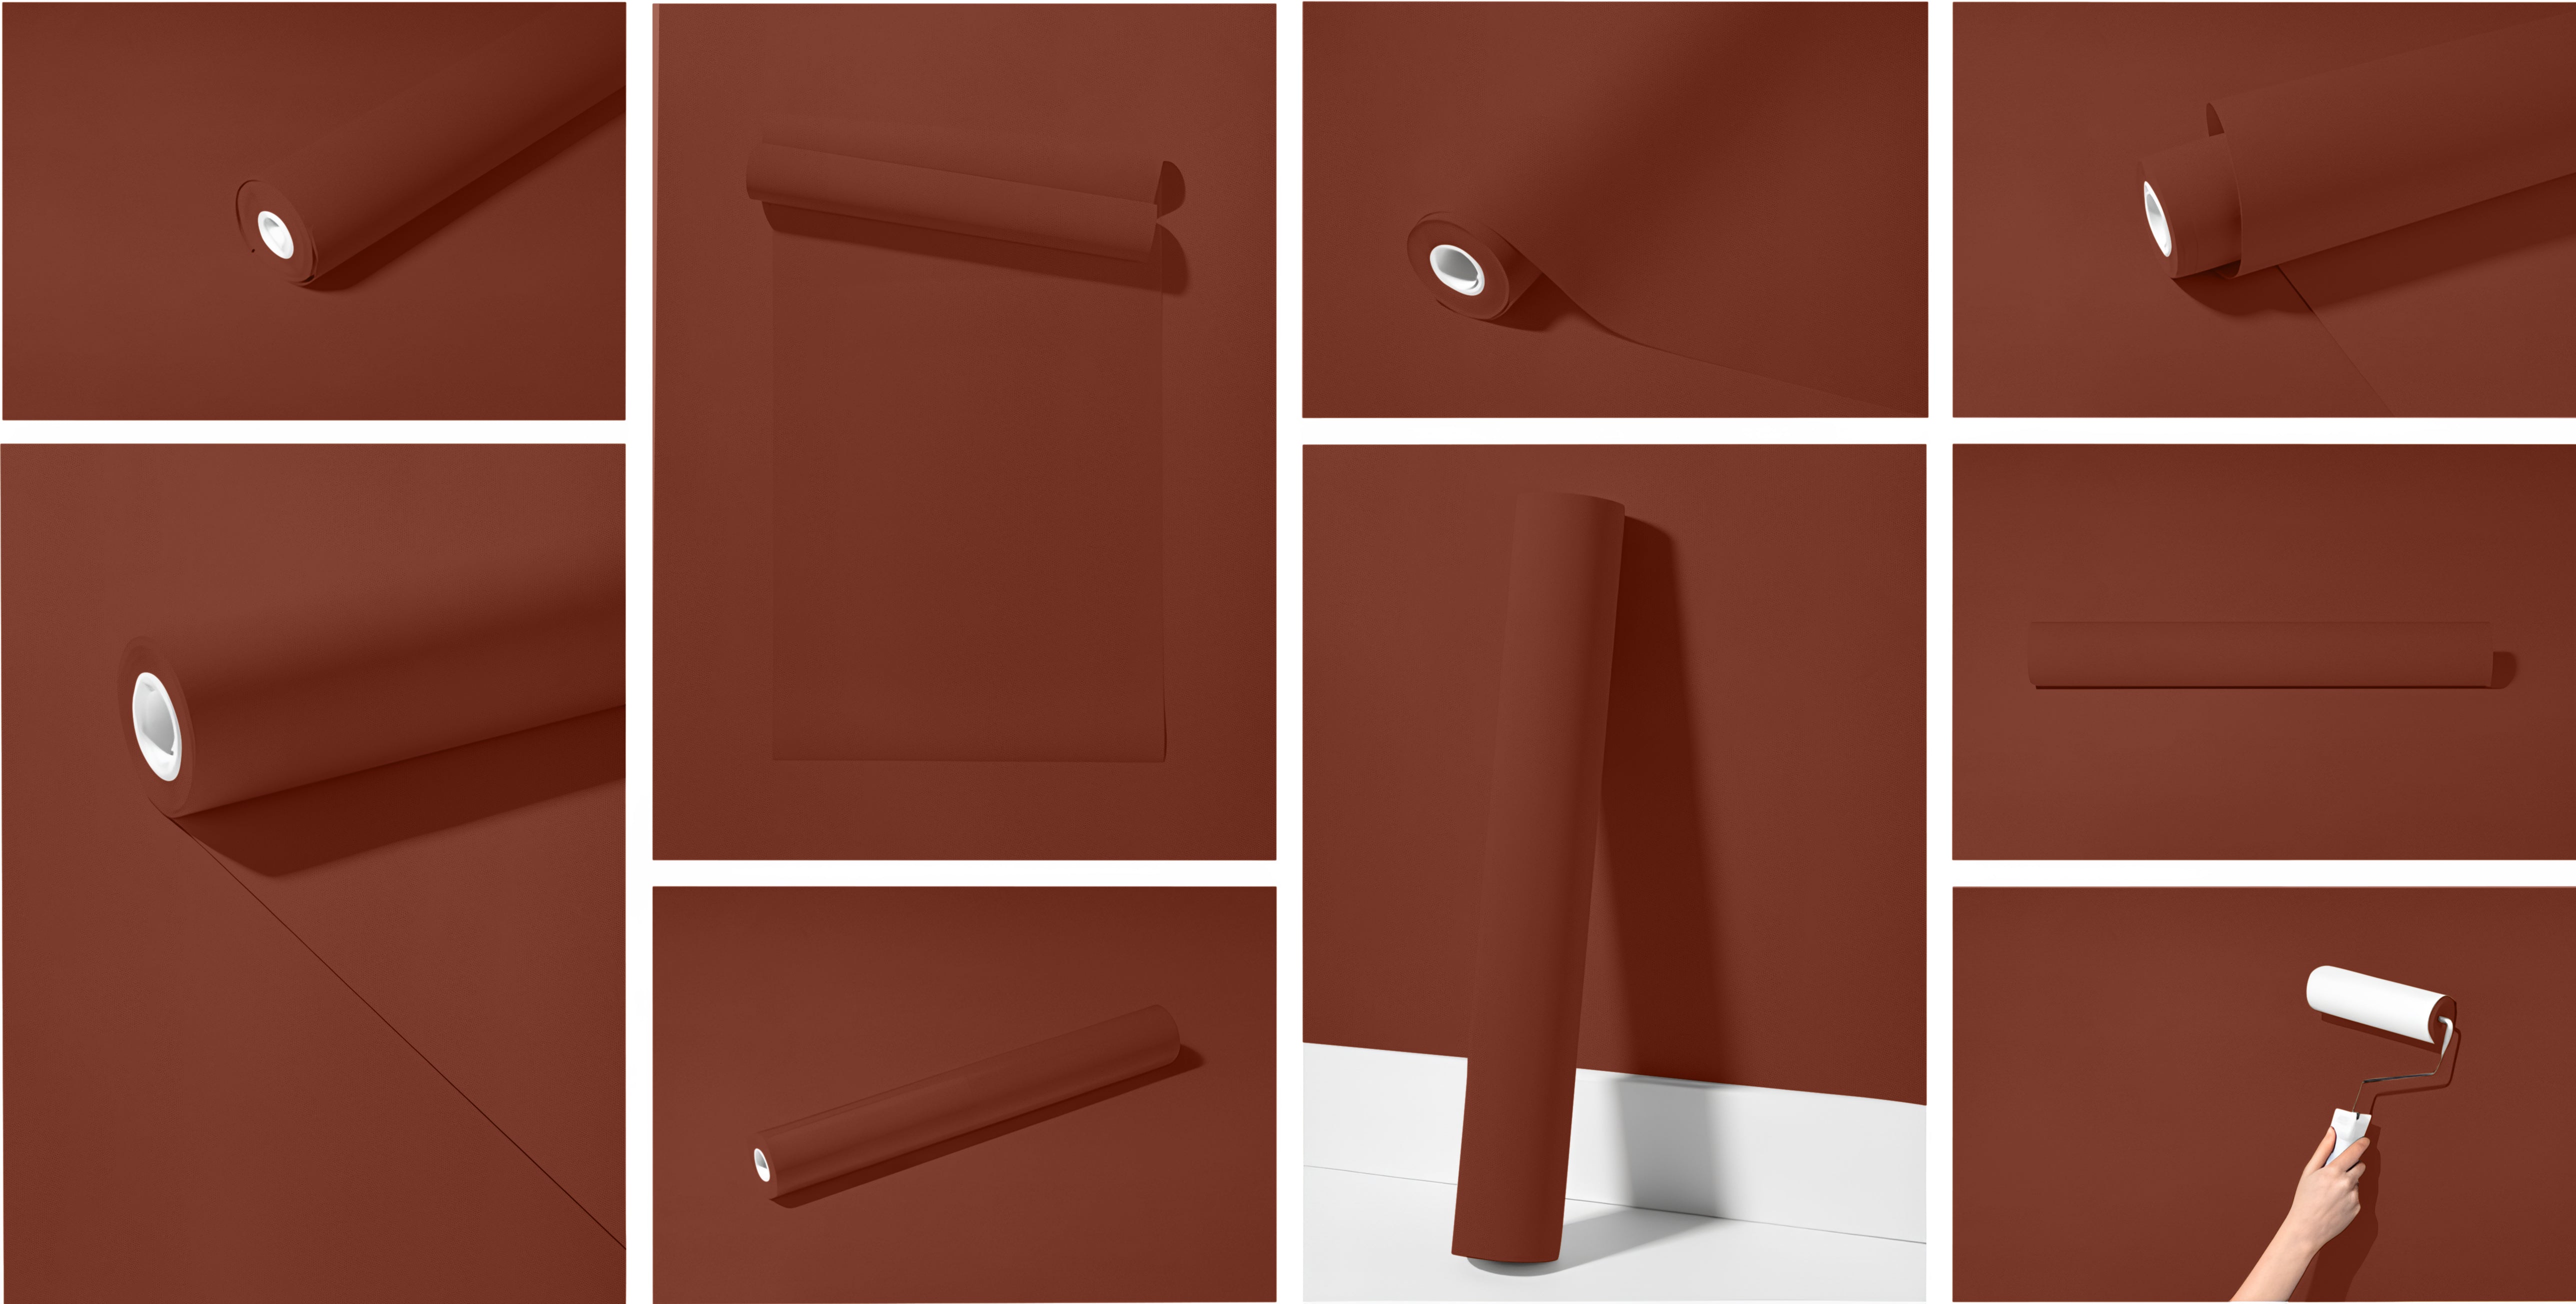 Peel & Stick Removable Re-usable Paint - Color RAL 8029 Pearl Copper - offRAL™ - RALRAW LLC, USA